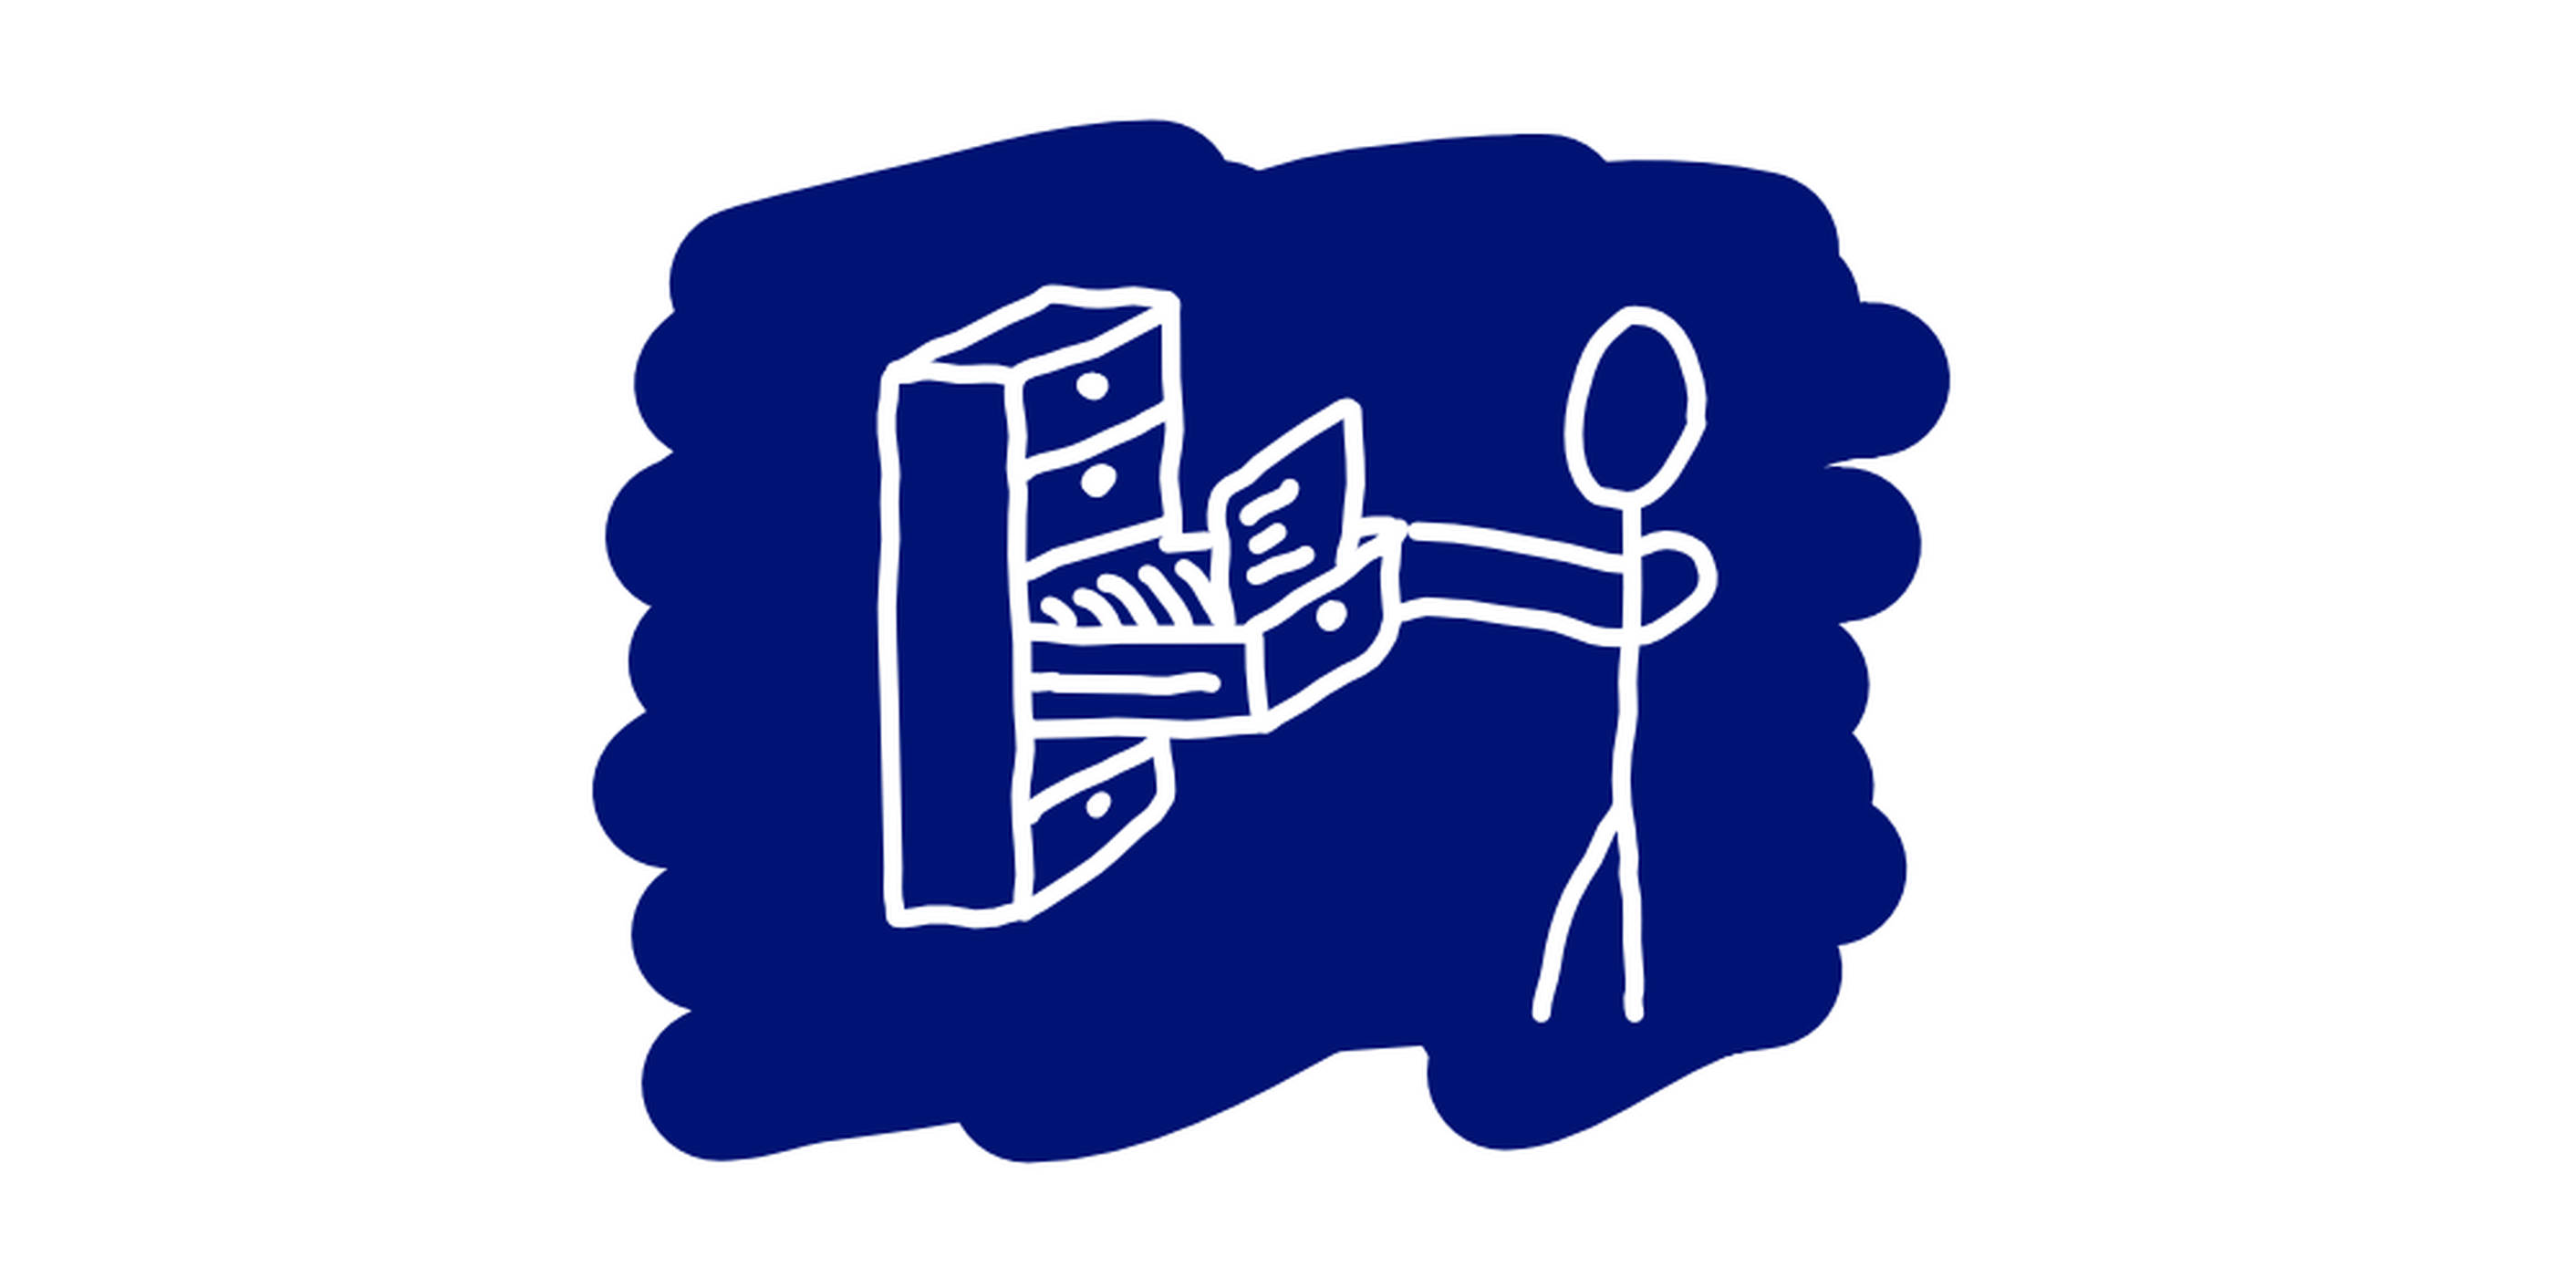 A stick figure that searches through a stuffy drawer for the right file.